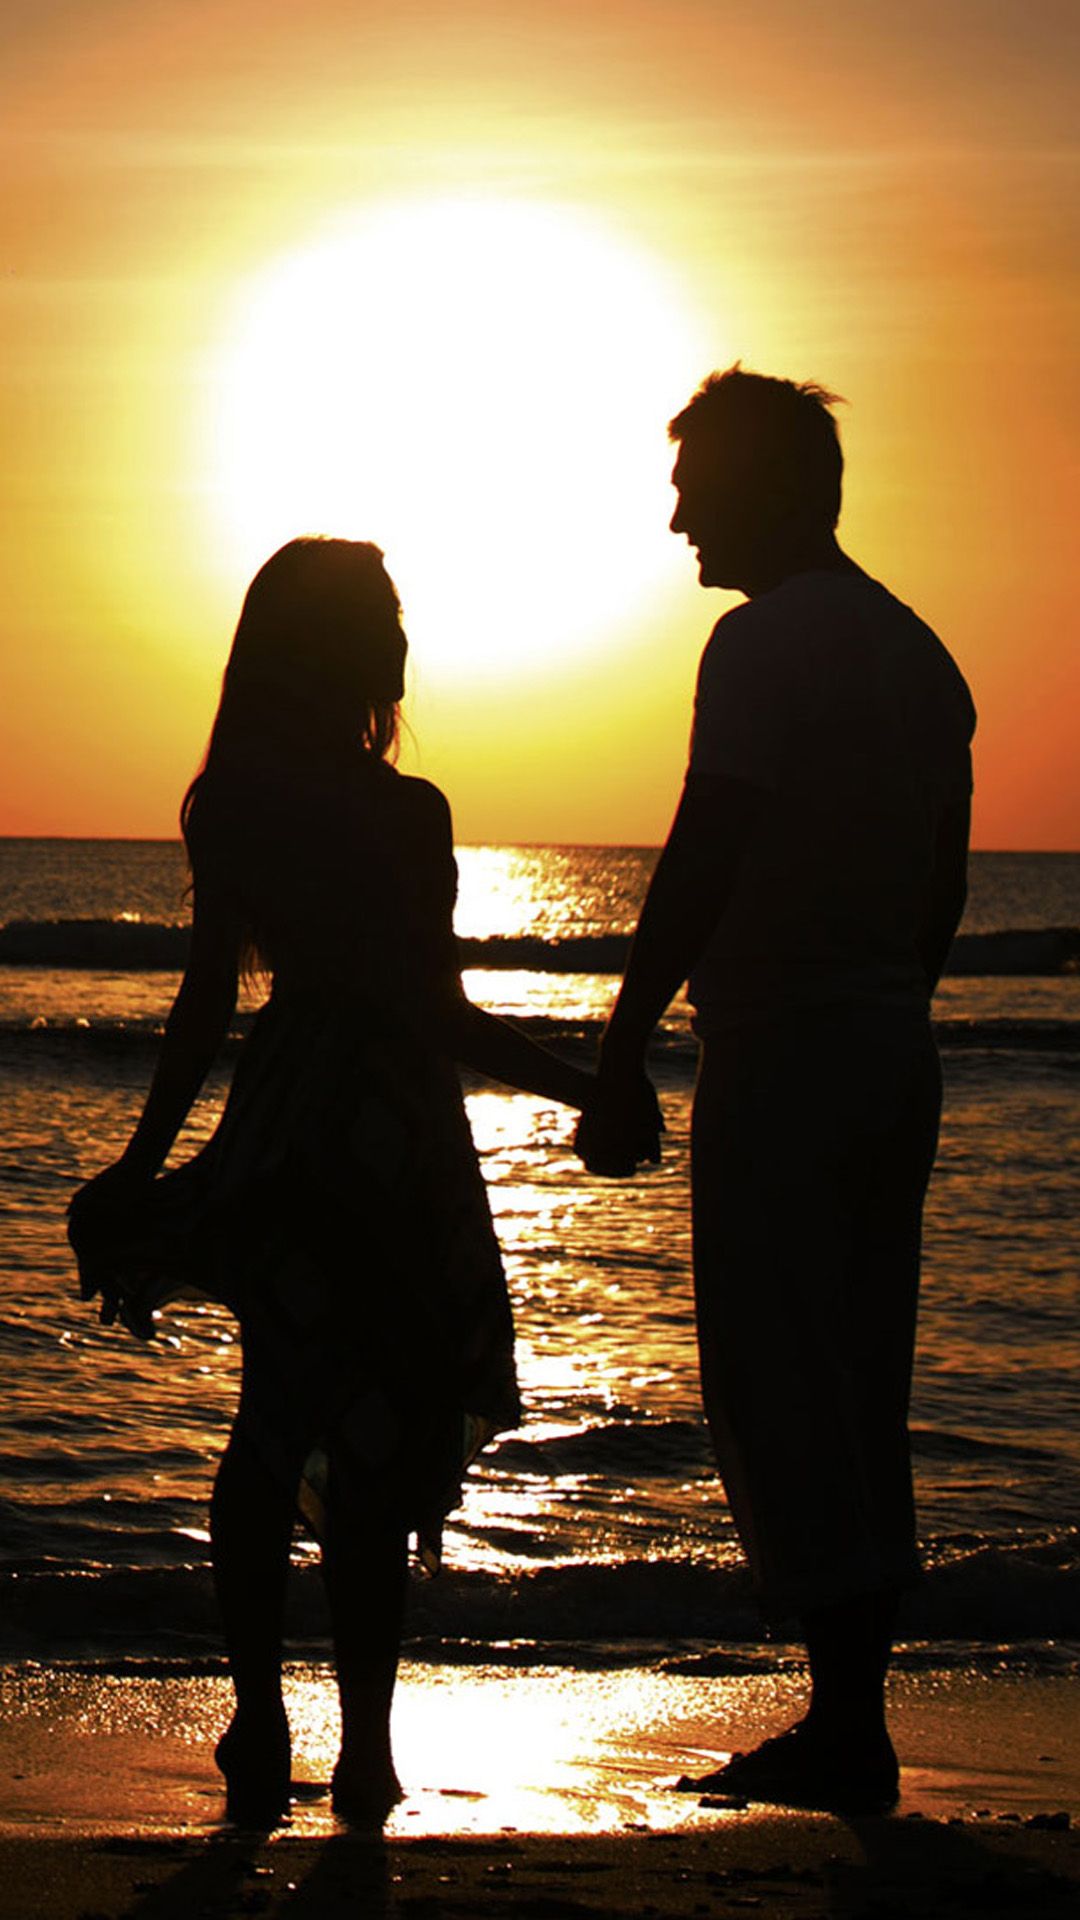 Sunset Beach Couple Android Wallpaper Couples Wallpaper For Android